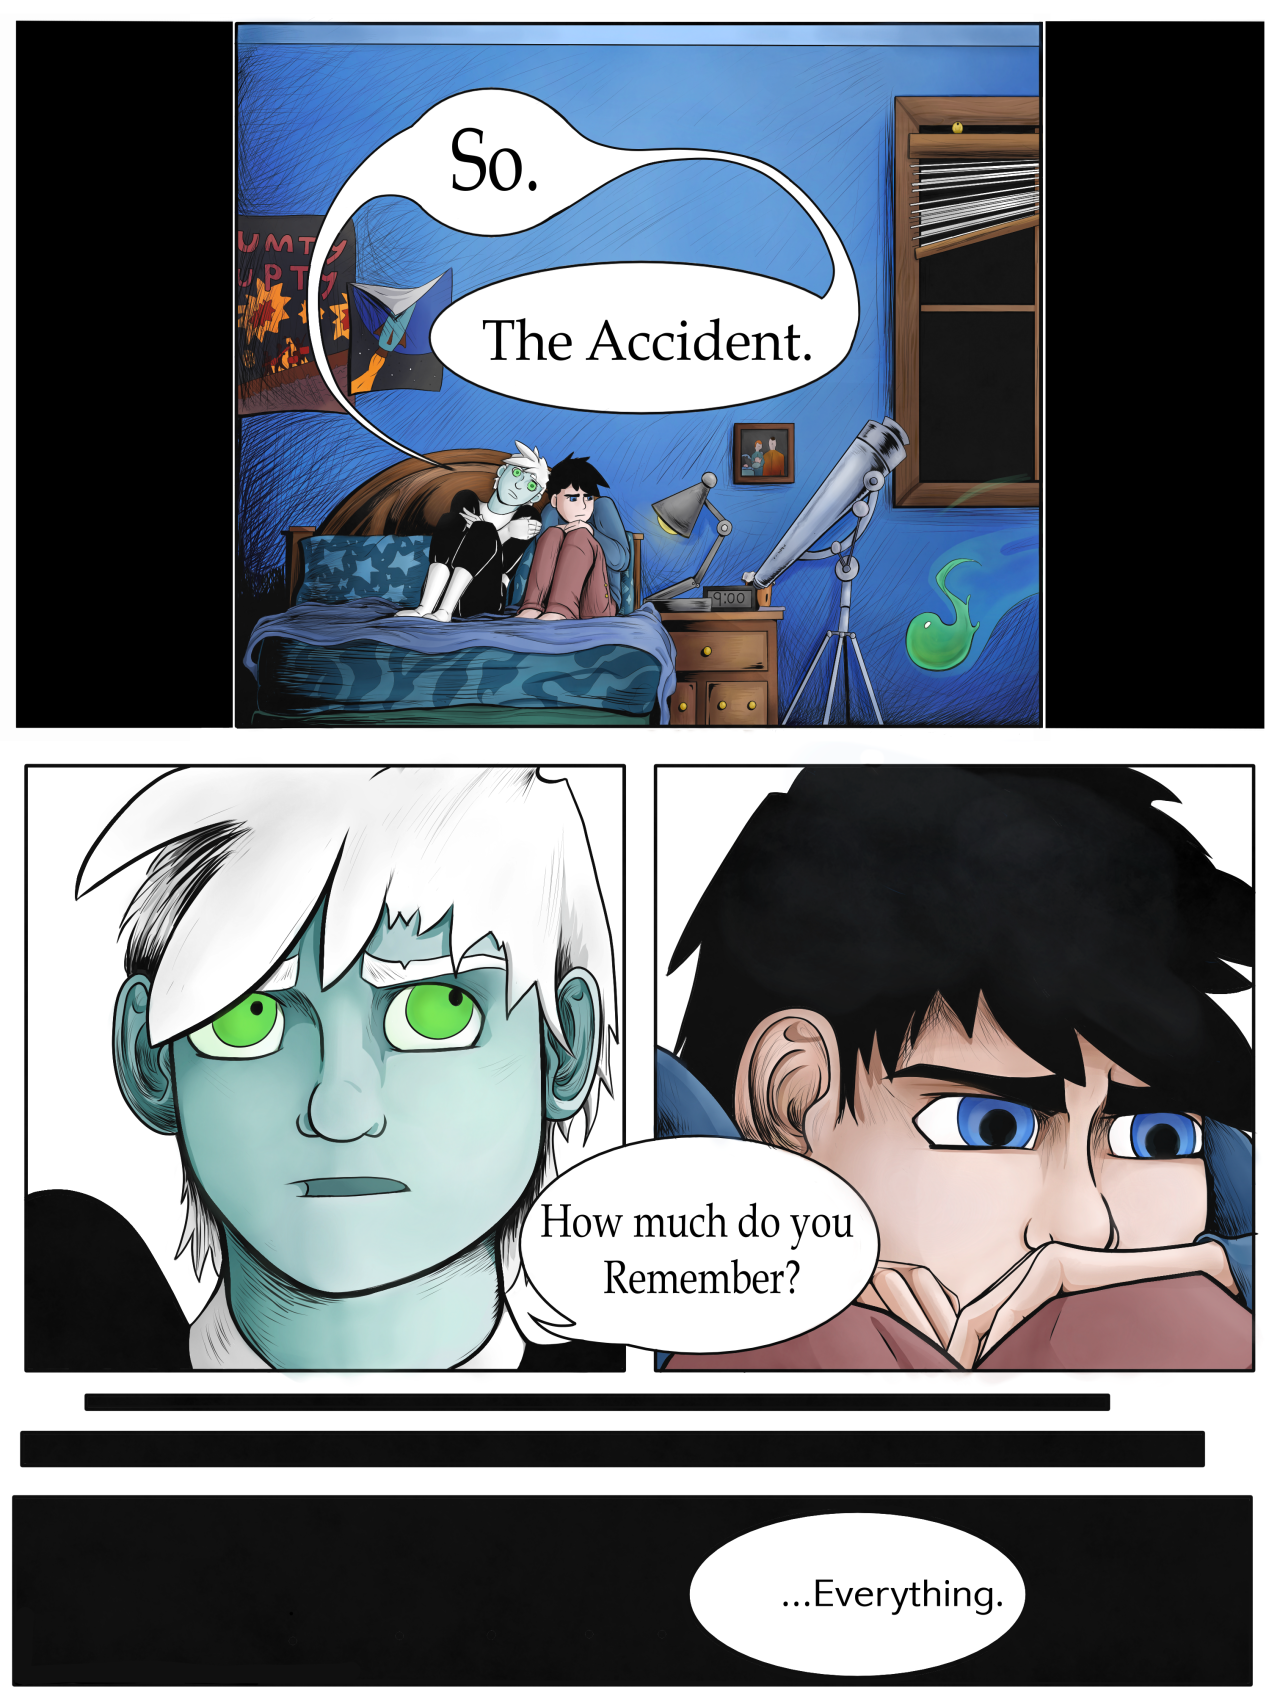 Face to Face fancomic